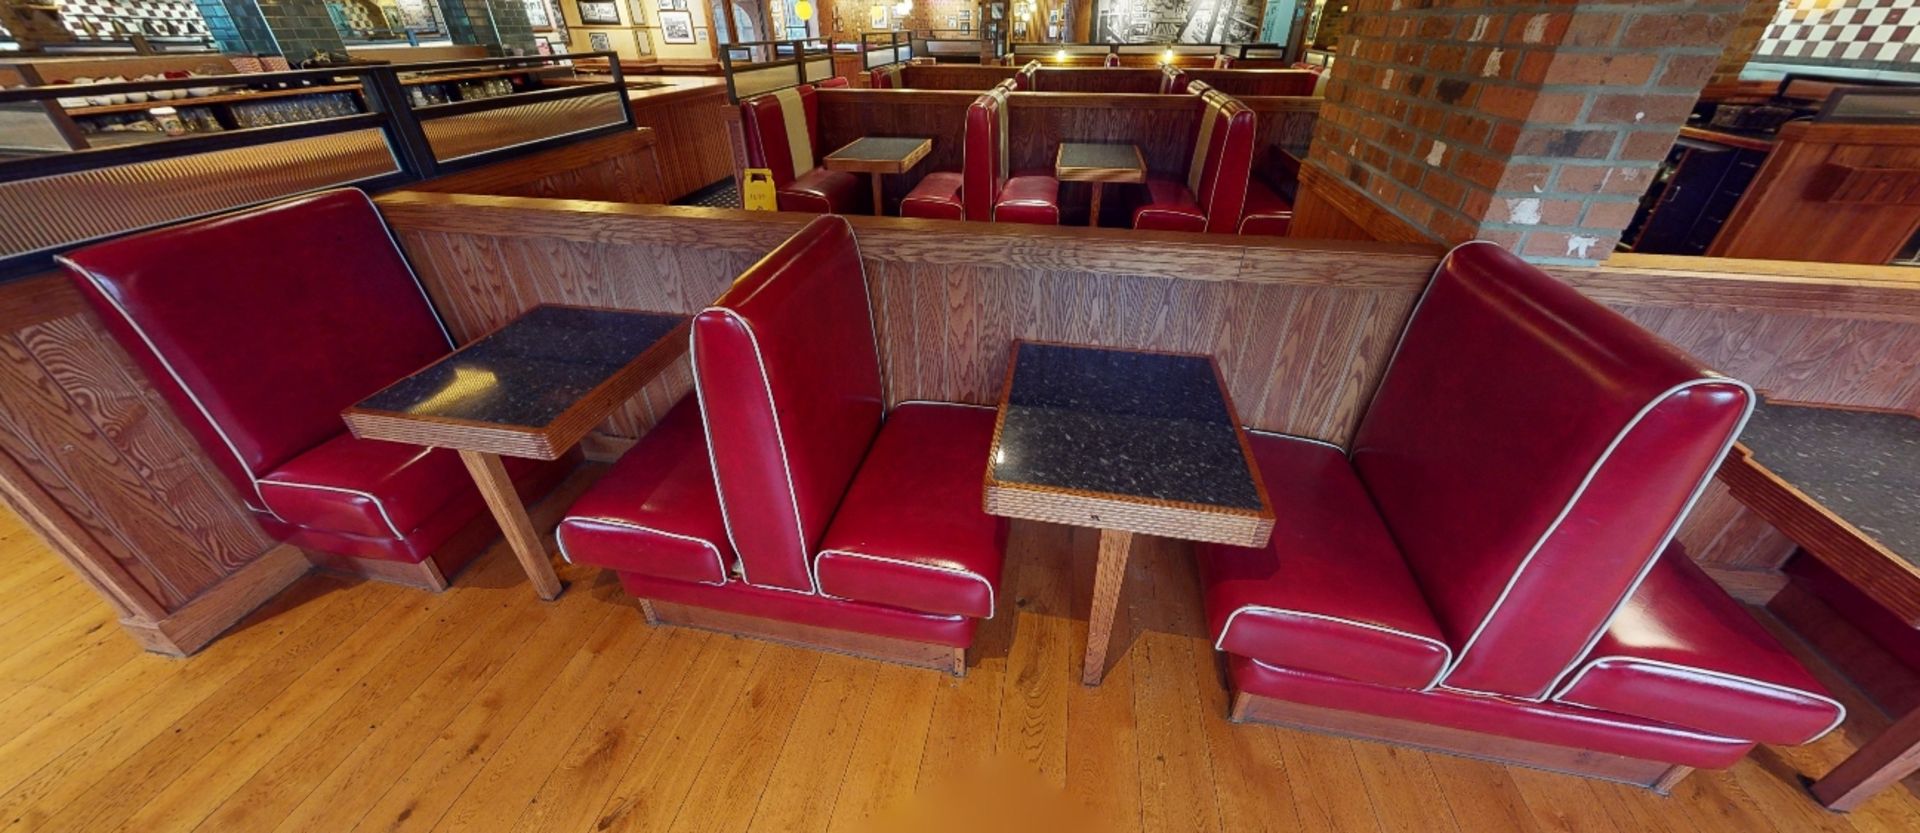 Selection of Single Seating Benches and Dining Tables to Seat Upto 8 Persons - Retro - 1950's - Image 3 of 9